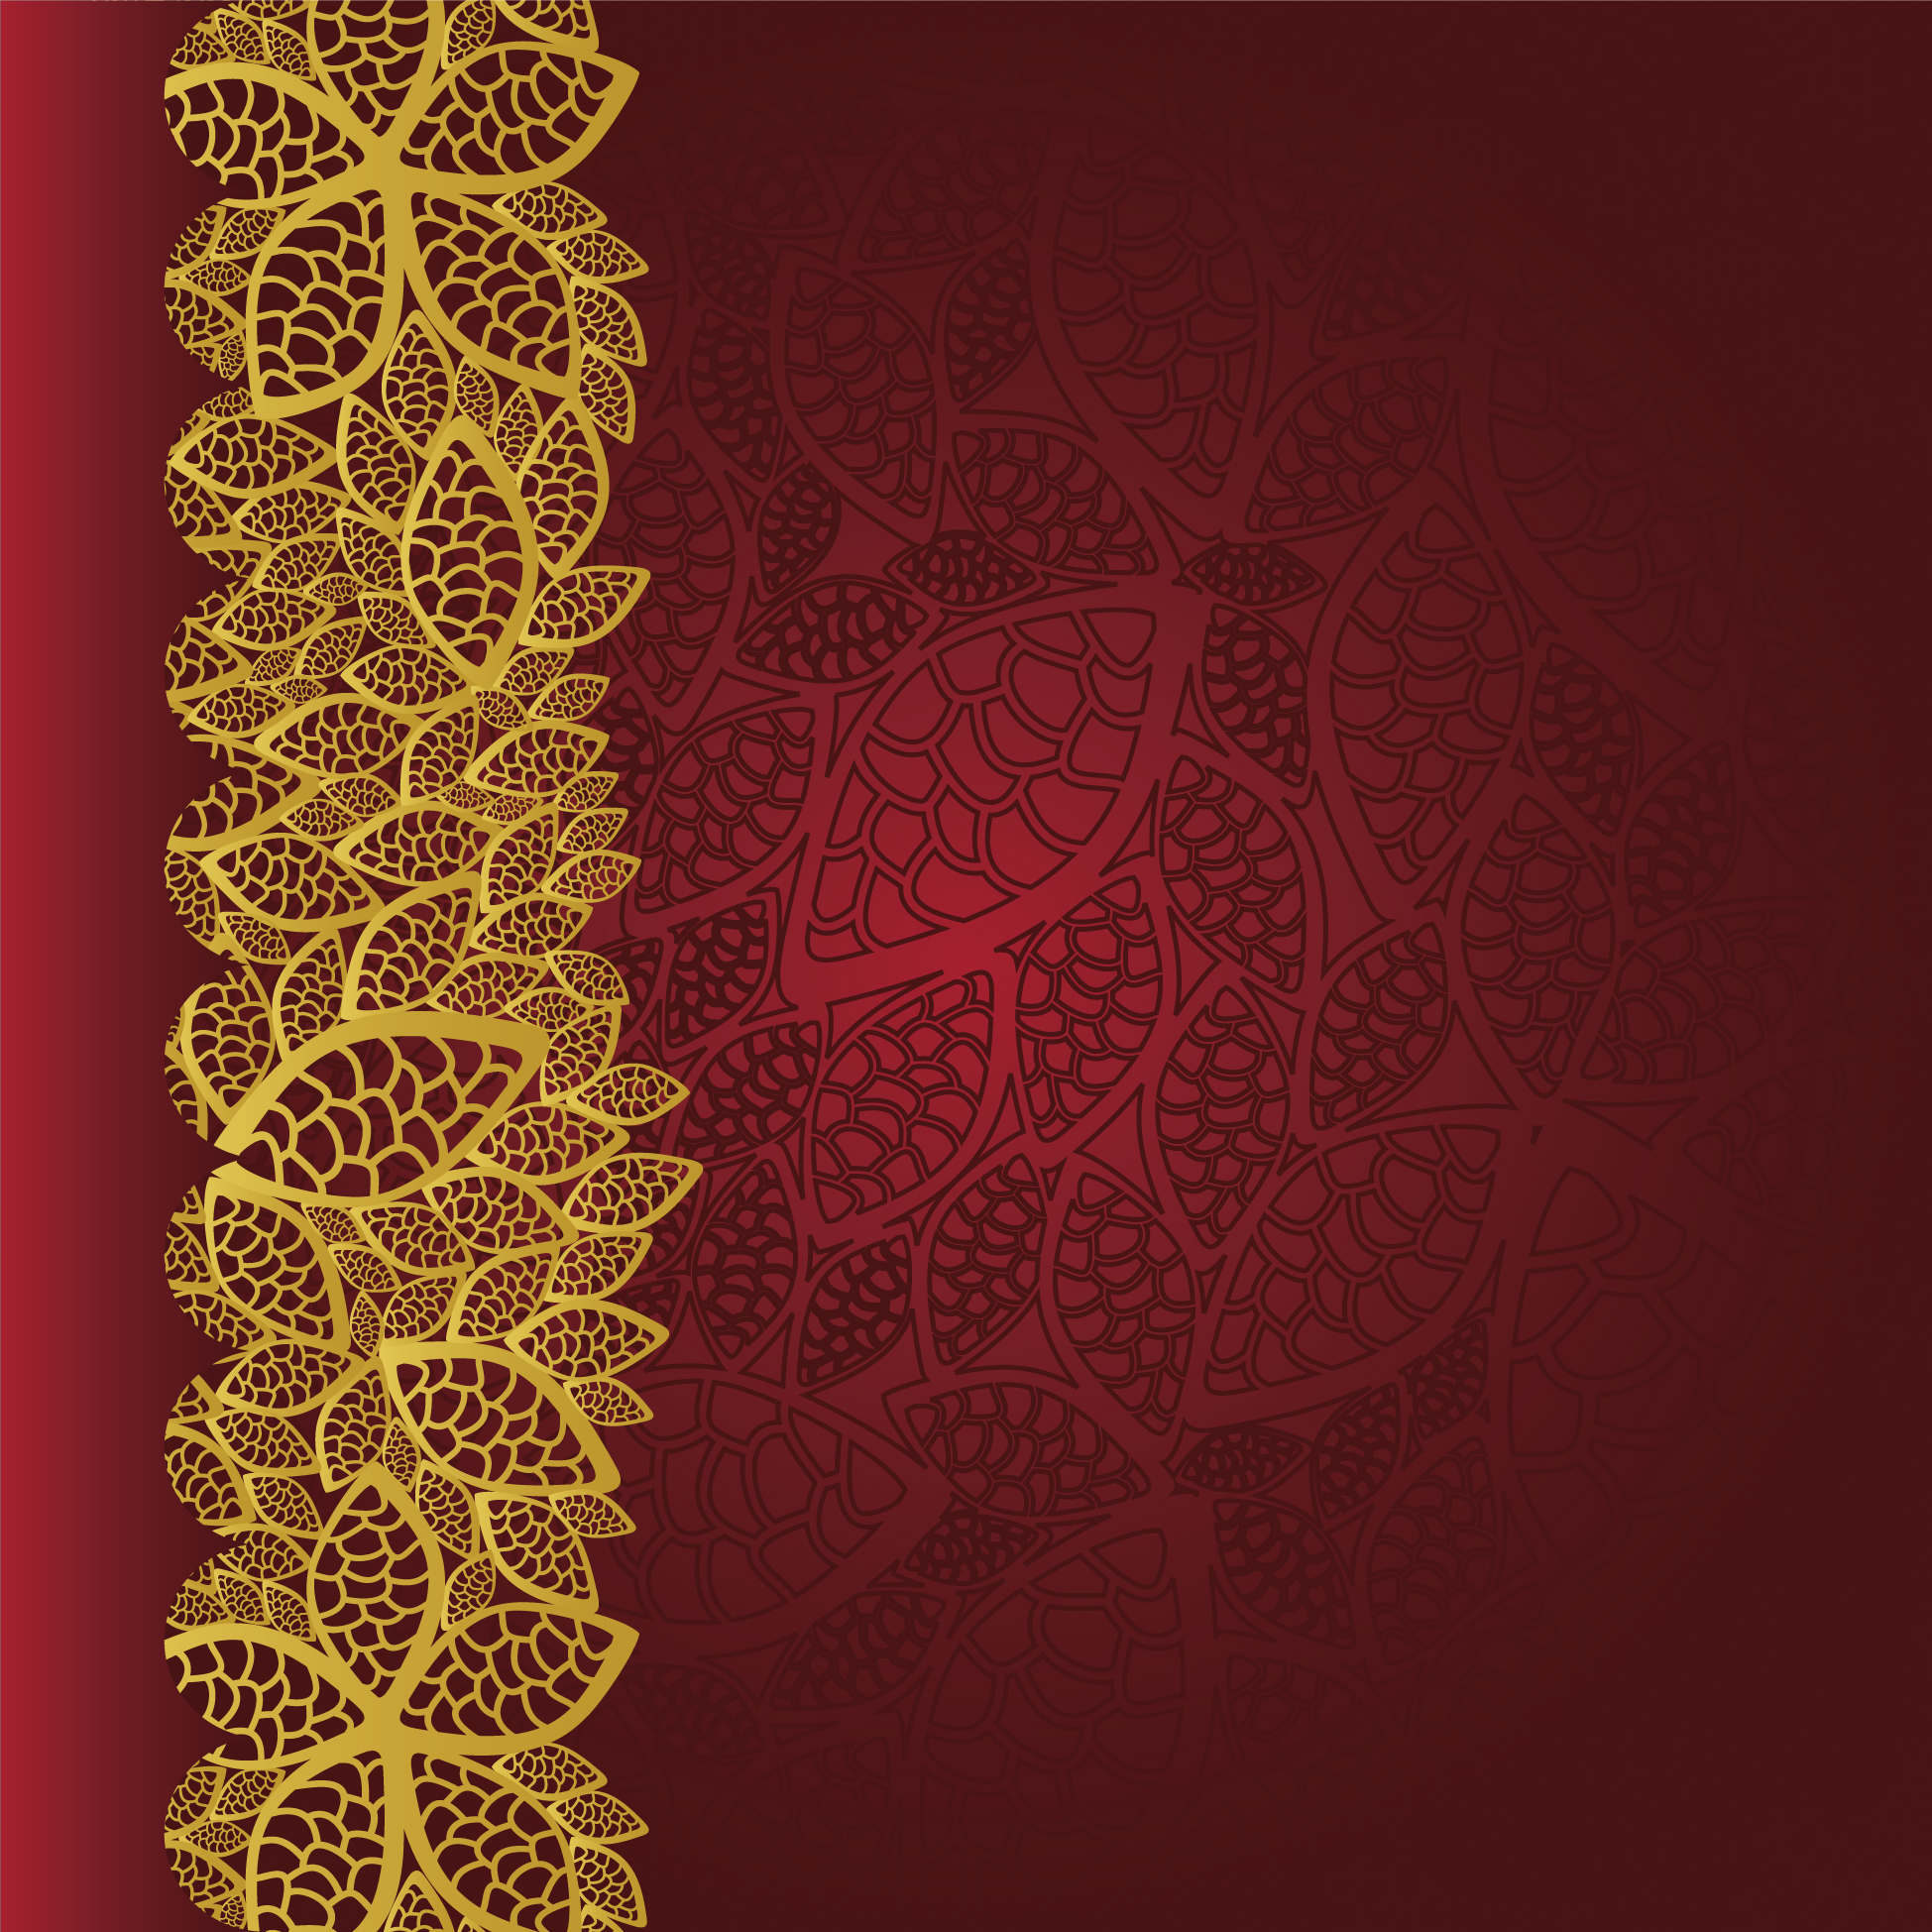 Red Gold Border Wallpaper Free Red Gold Border Background